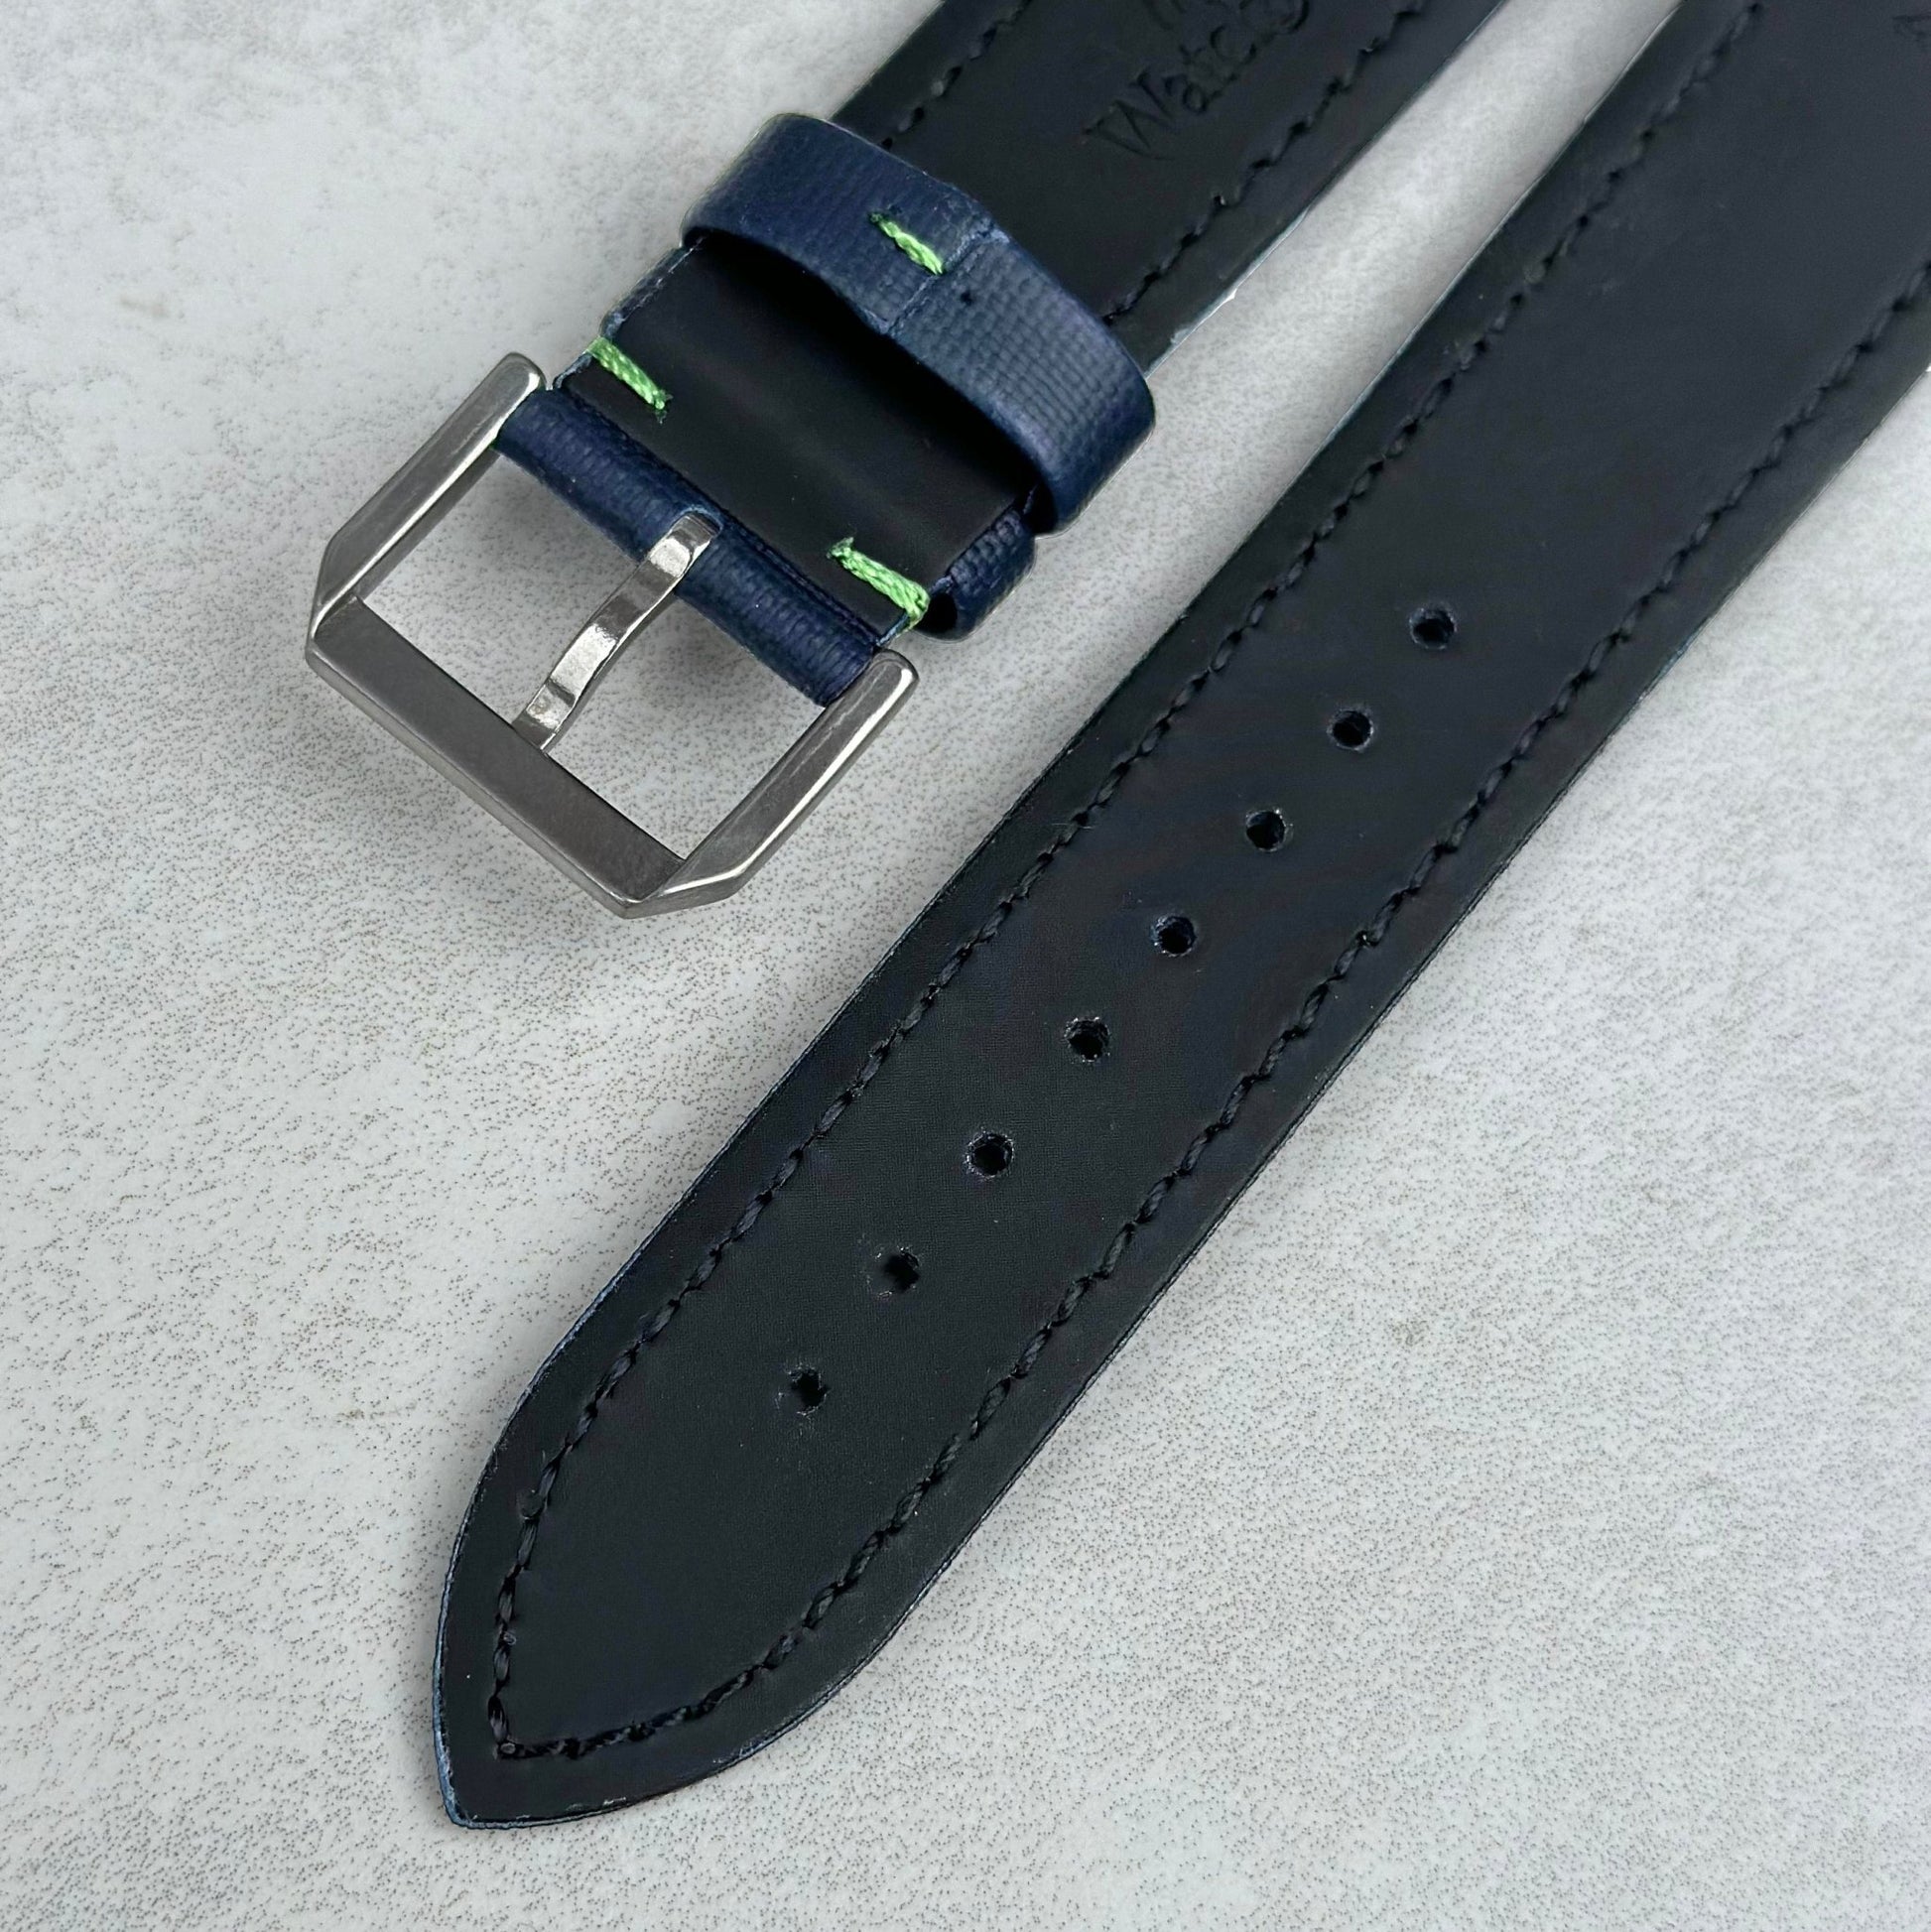 Underside of the brushed 316L stainless steel buckle on the Bermuda navy blue sail cloth watch strap.